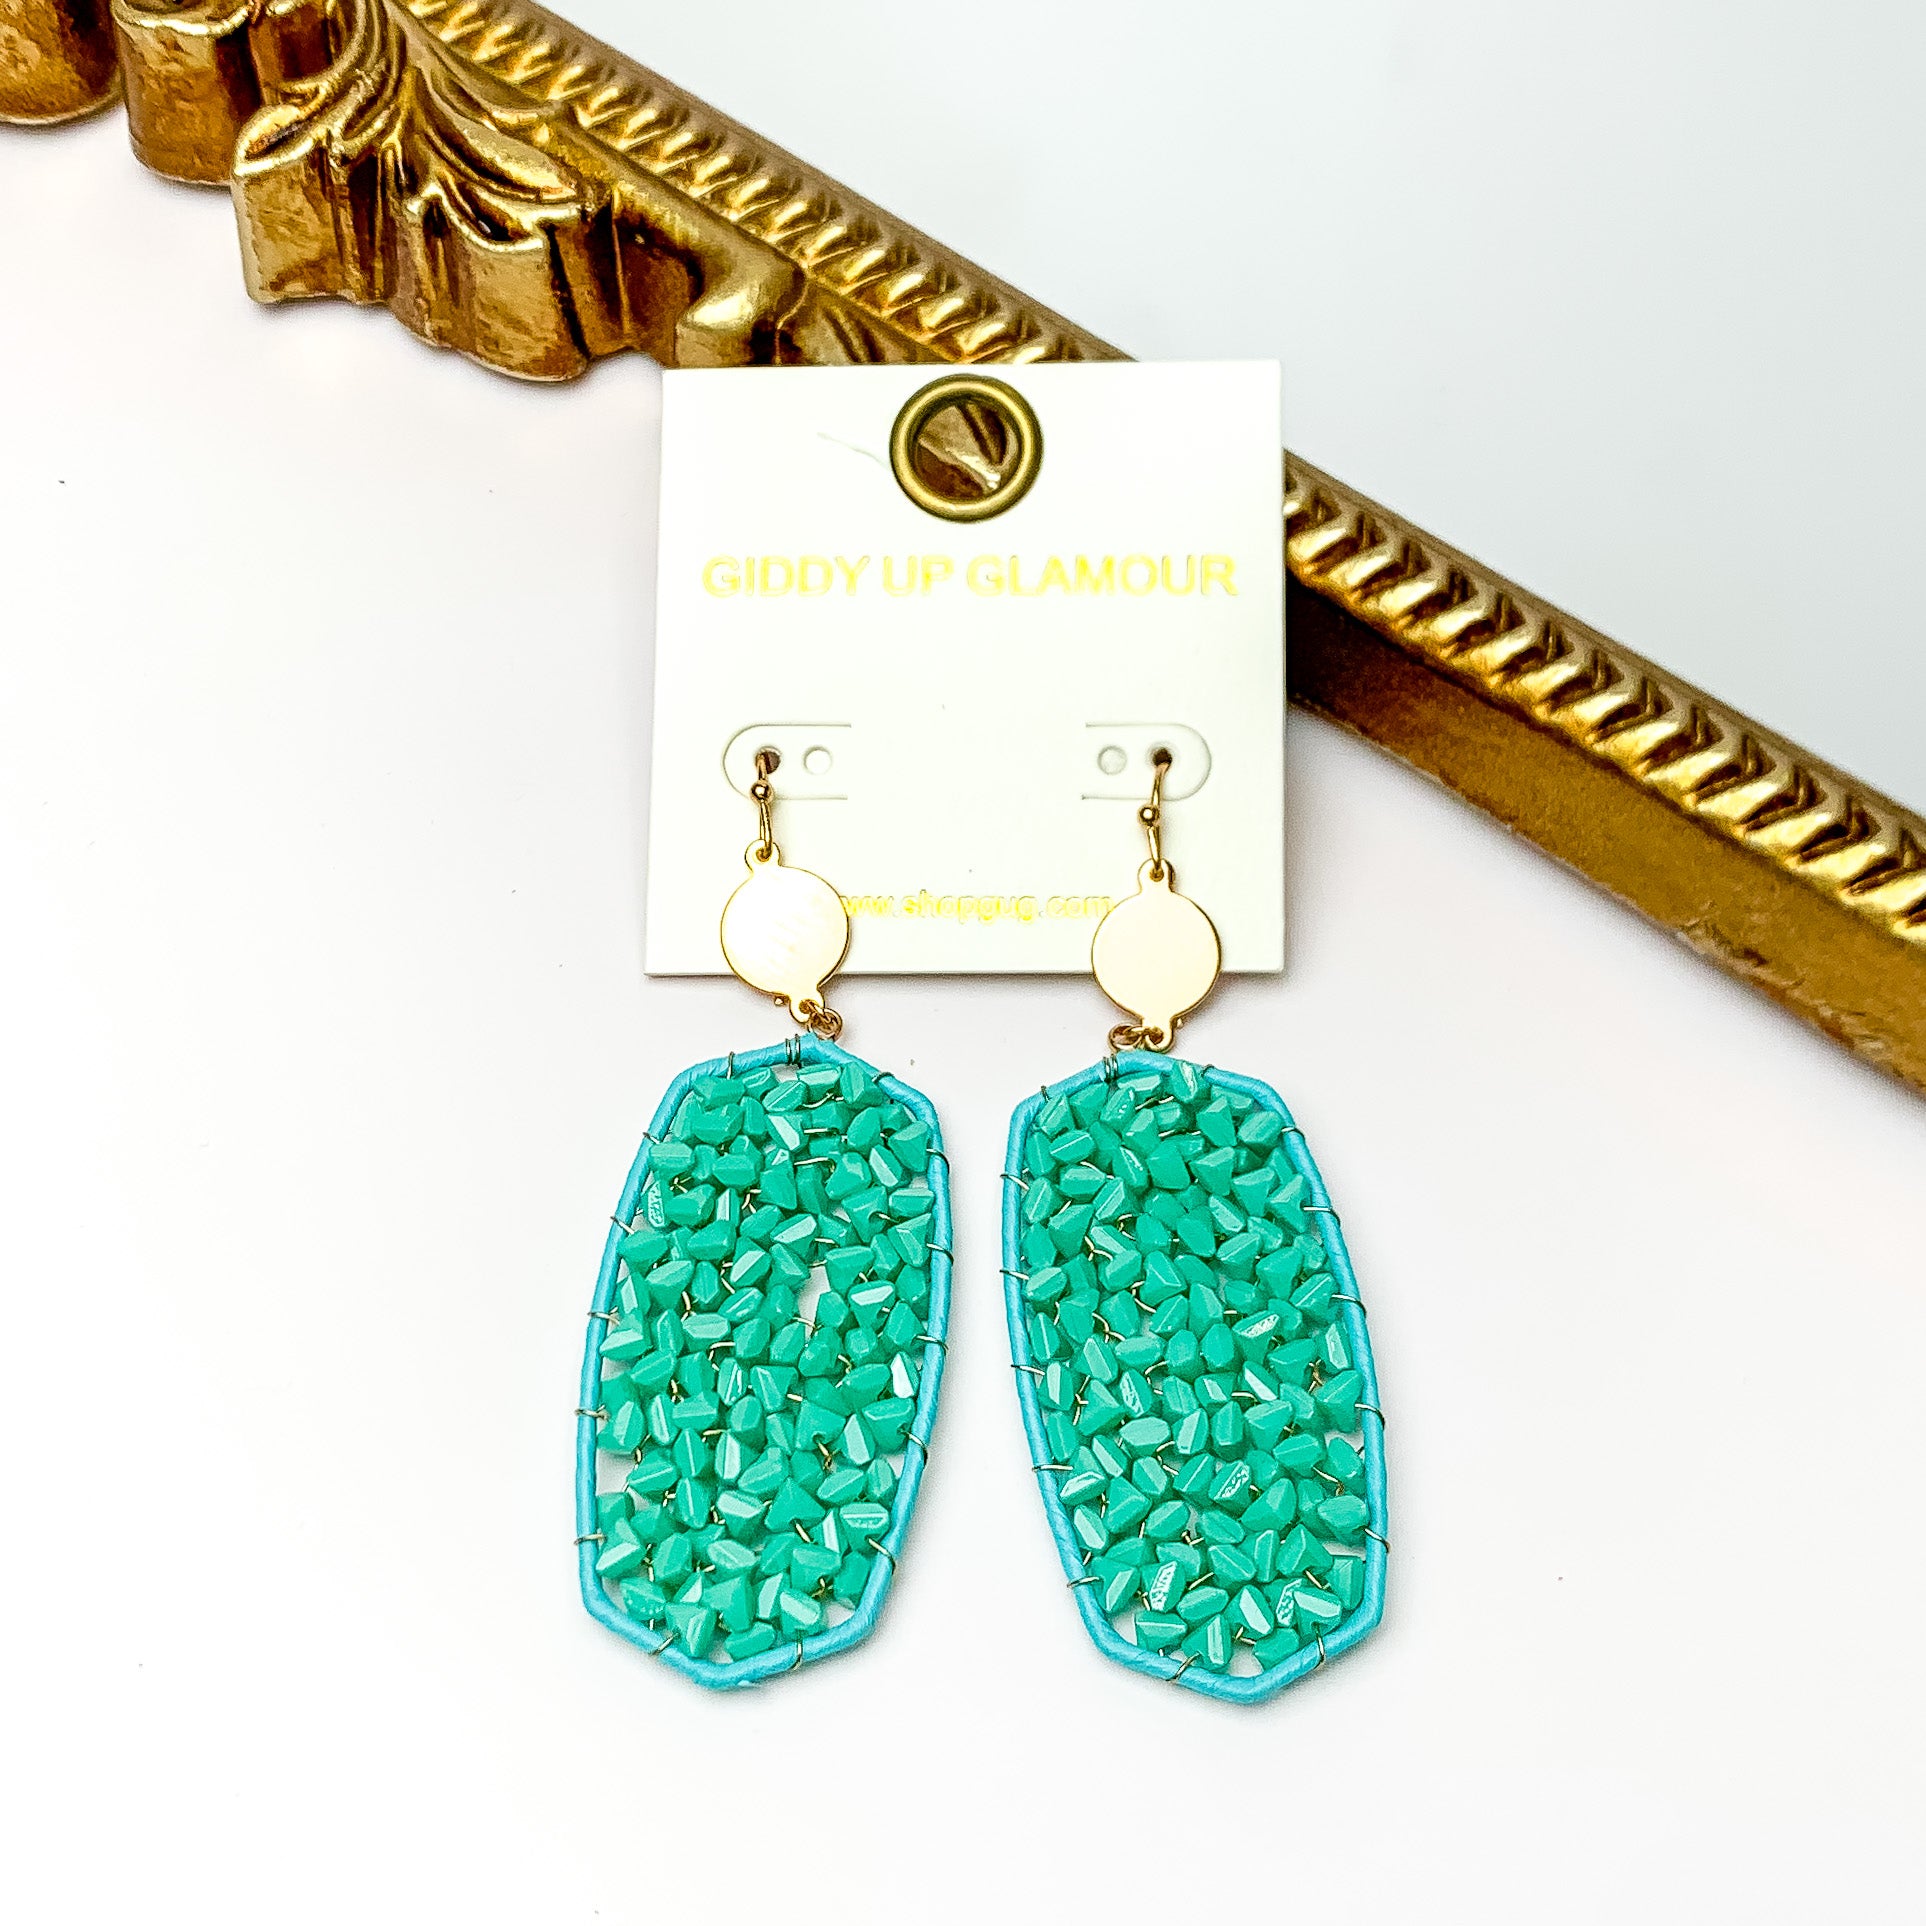 Turquoise Large Drop Earring with Gold Tone Accessory. Pictured on a white background with a gold frame through it.